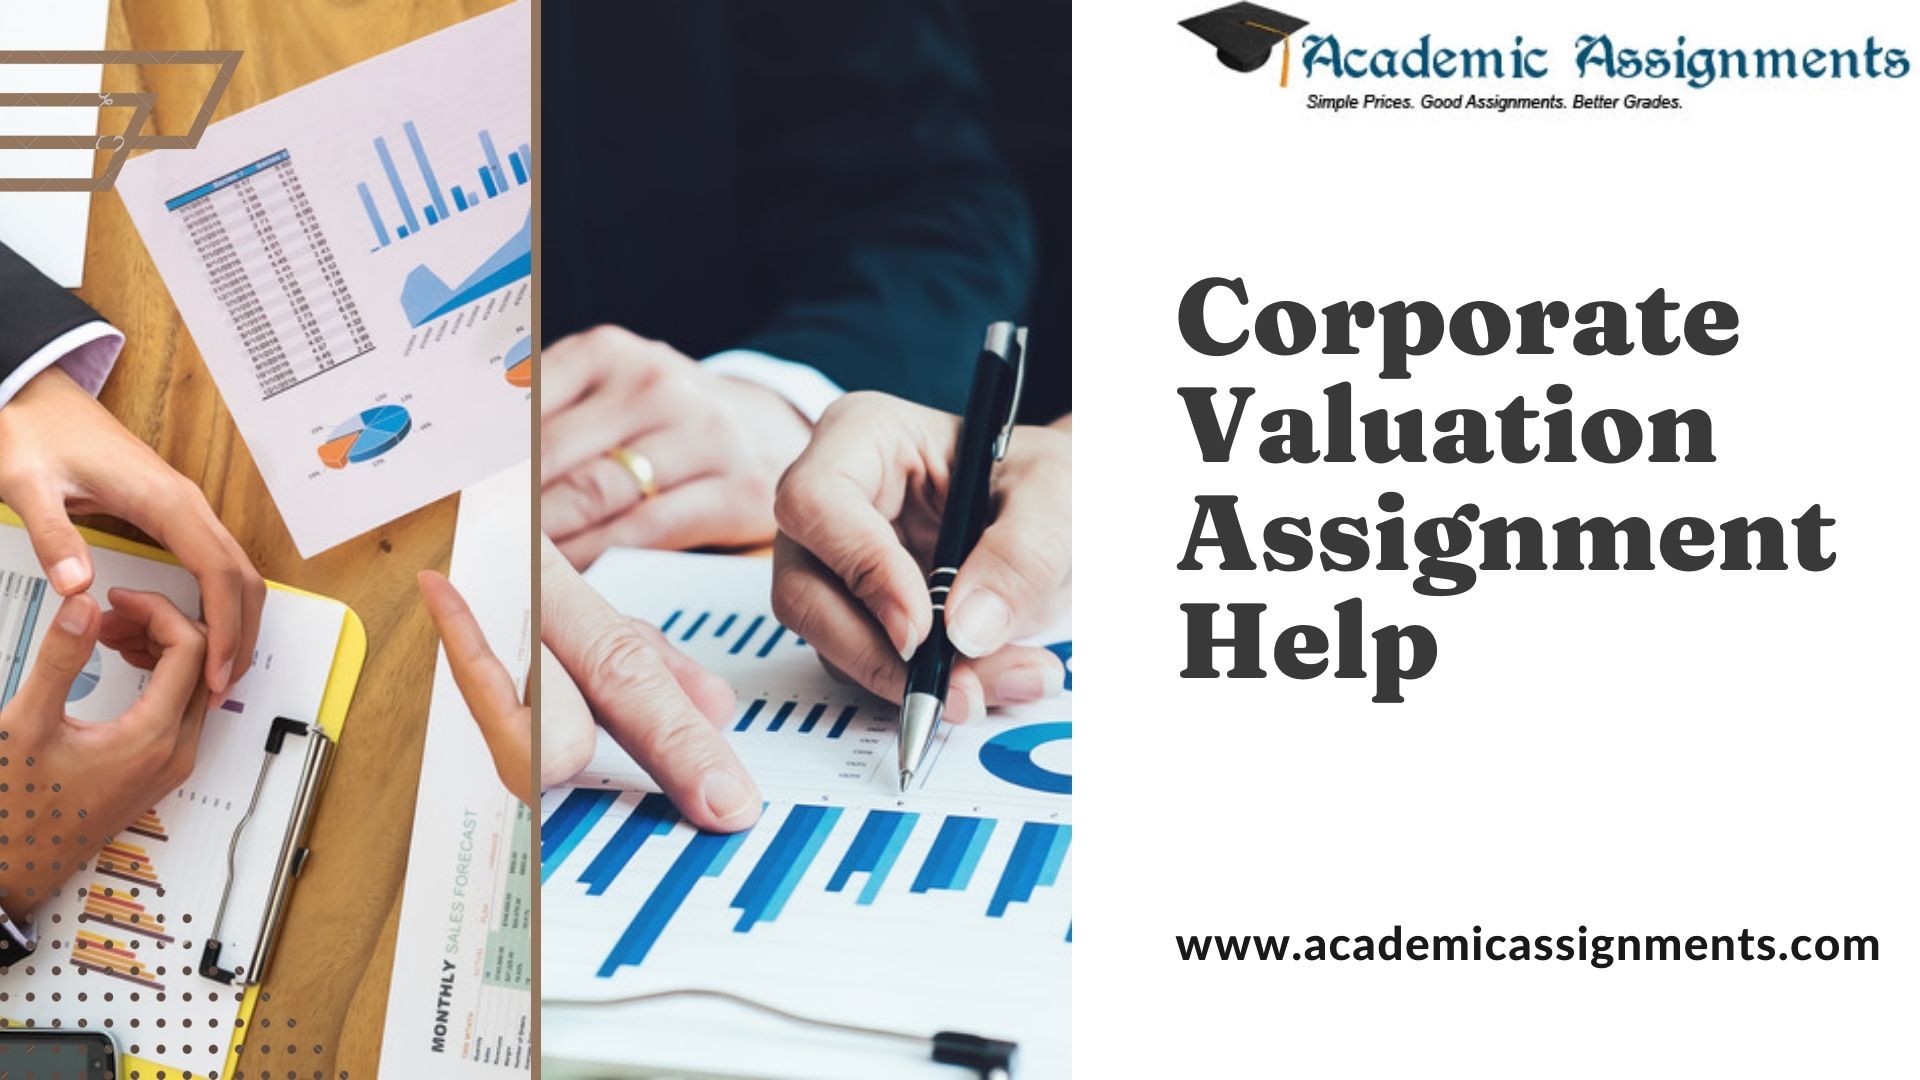 Corporate Valuation Assignment Help